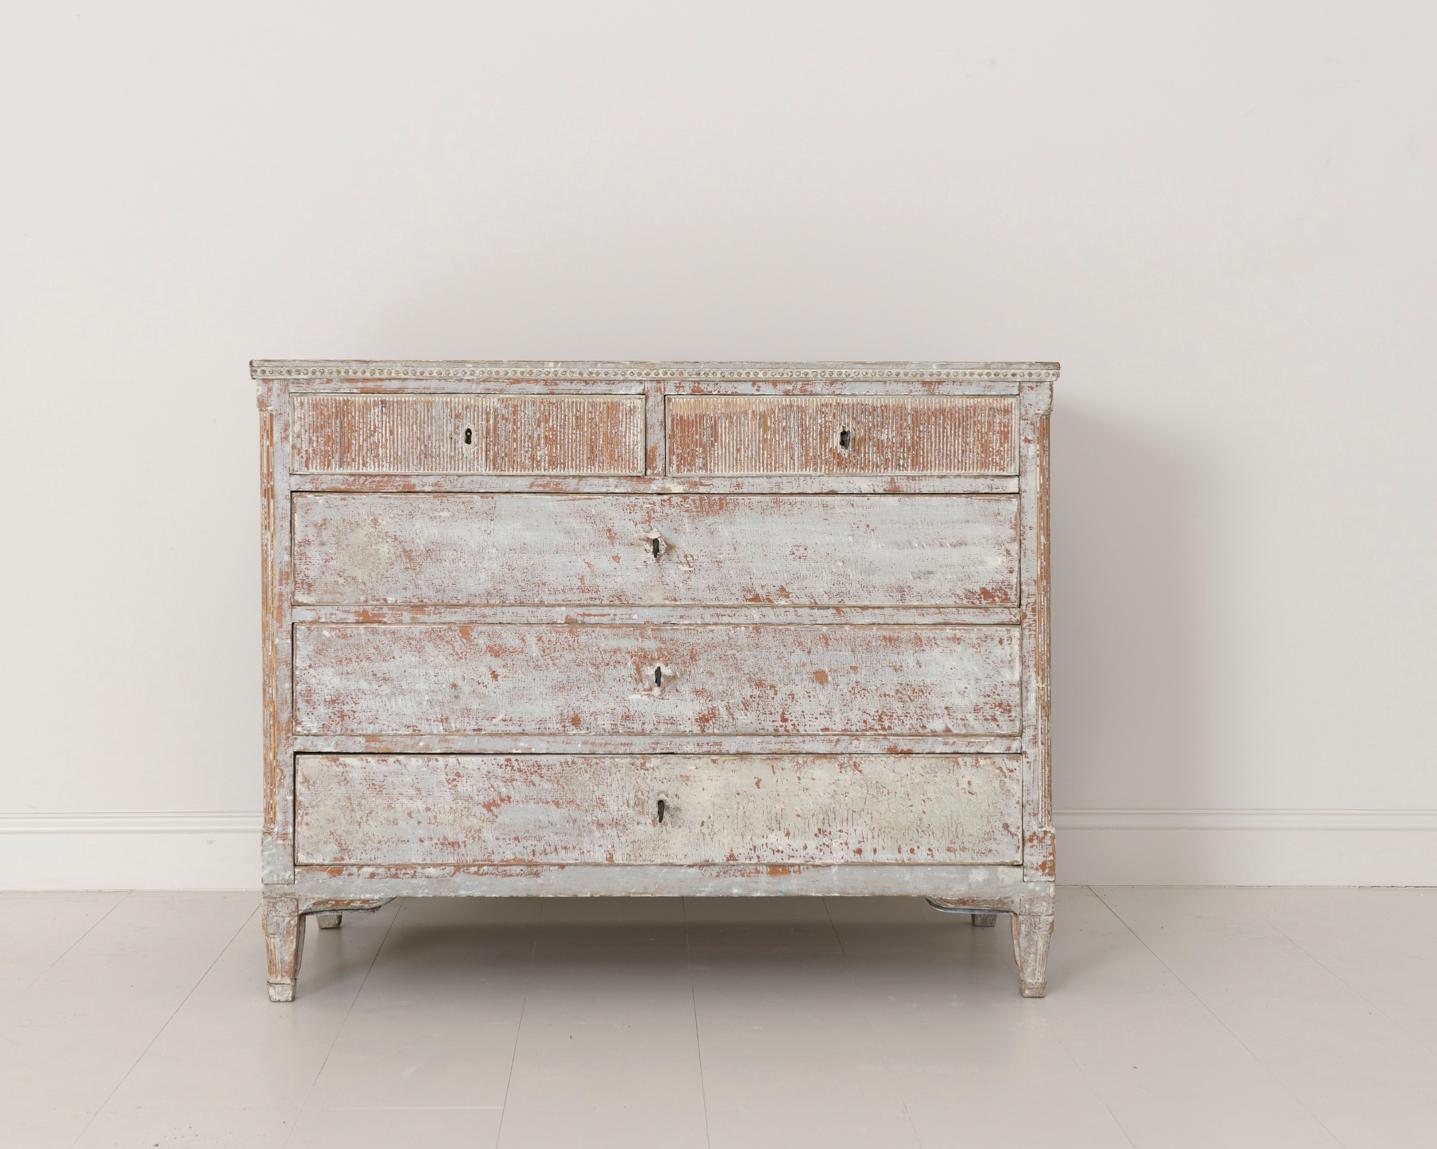 A stunning Swedish commode from the Gustavian period hand-scraped to reveal the original, soft gray paint with traces of the original dark red primer peaking through in areas. The trim around the top is beaded and below there are two smaller reeded